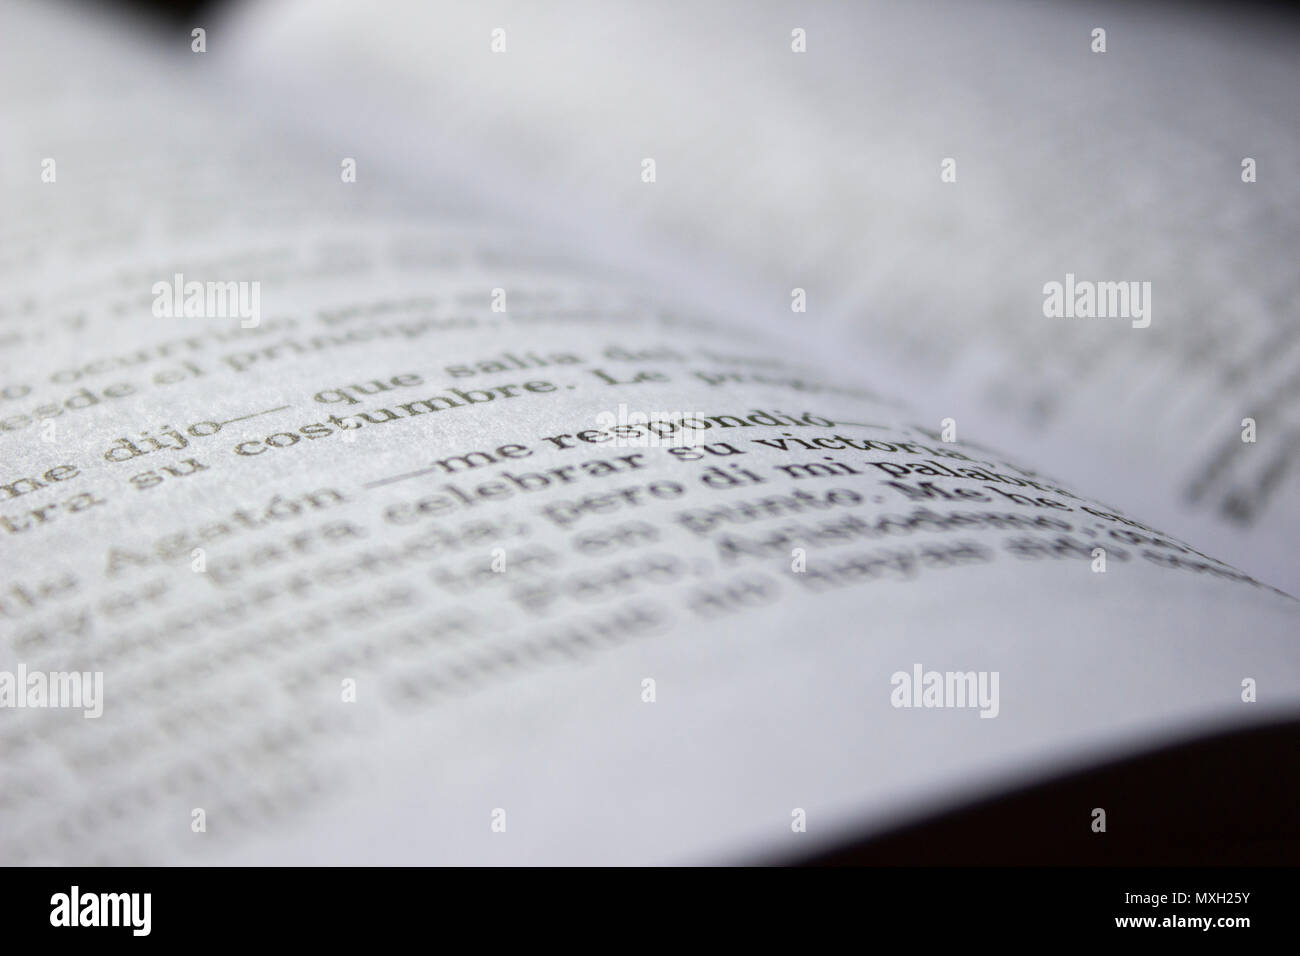 Open book showing a dialogue in spanish Stock Photo